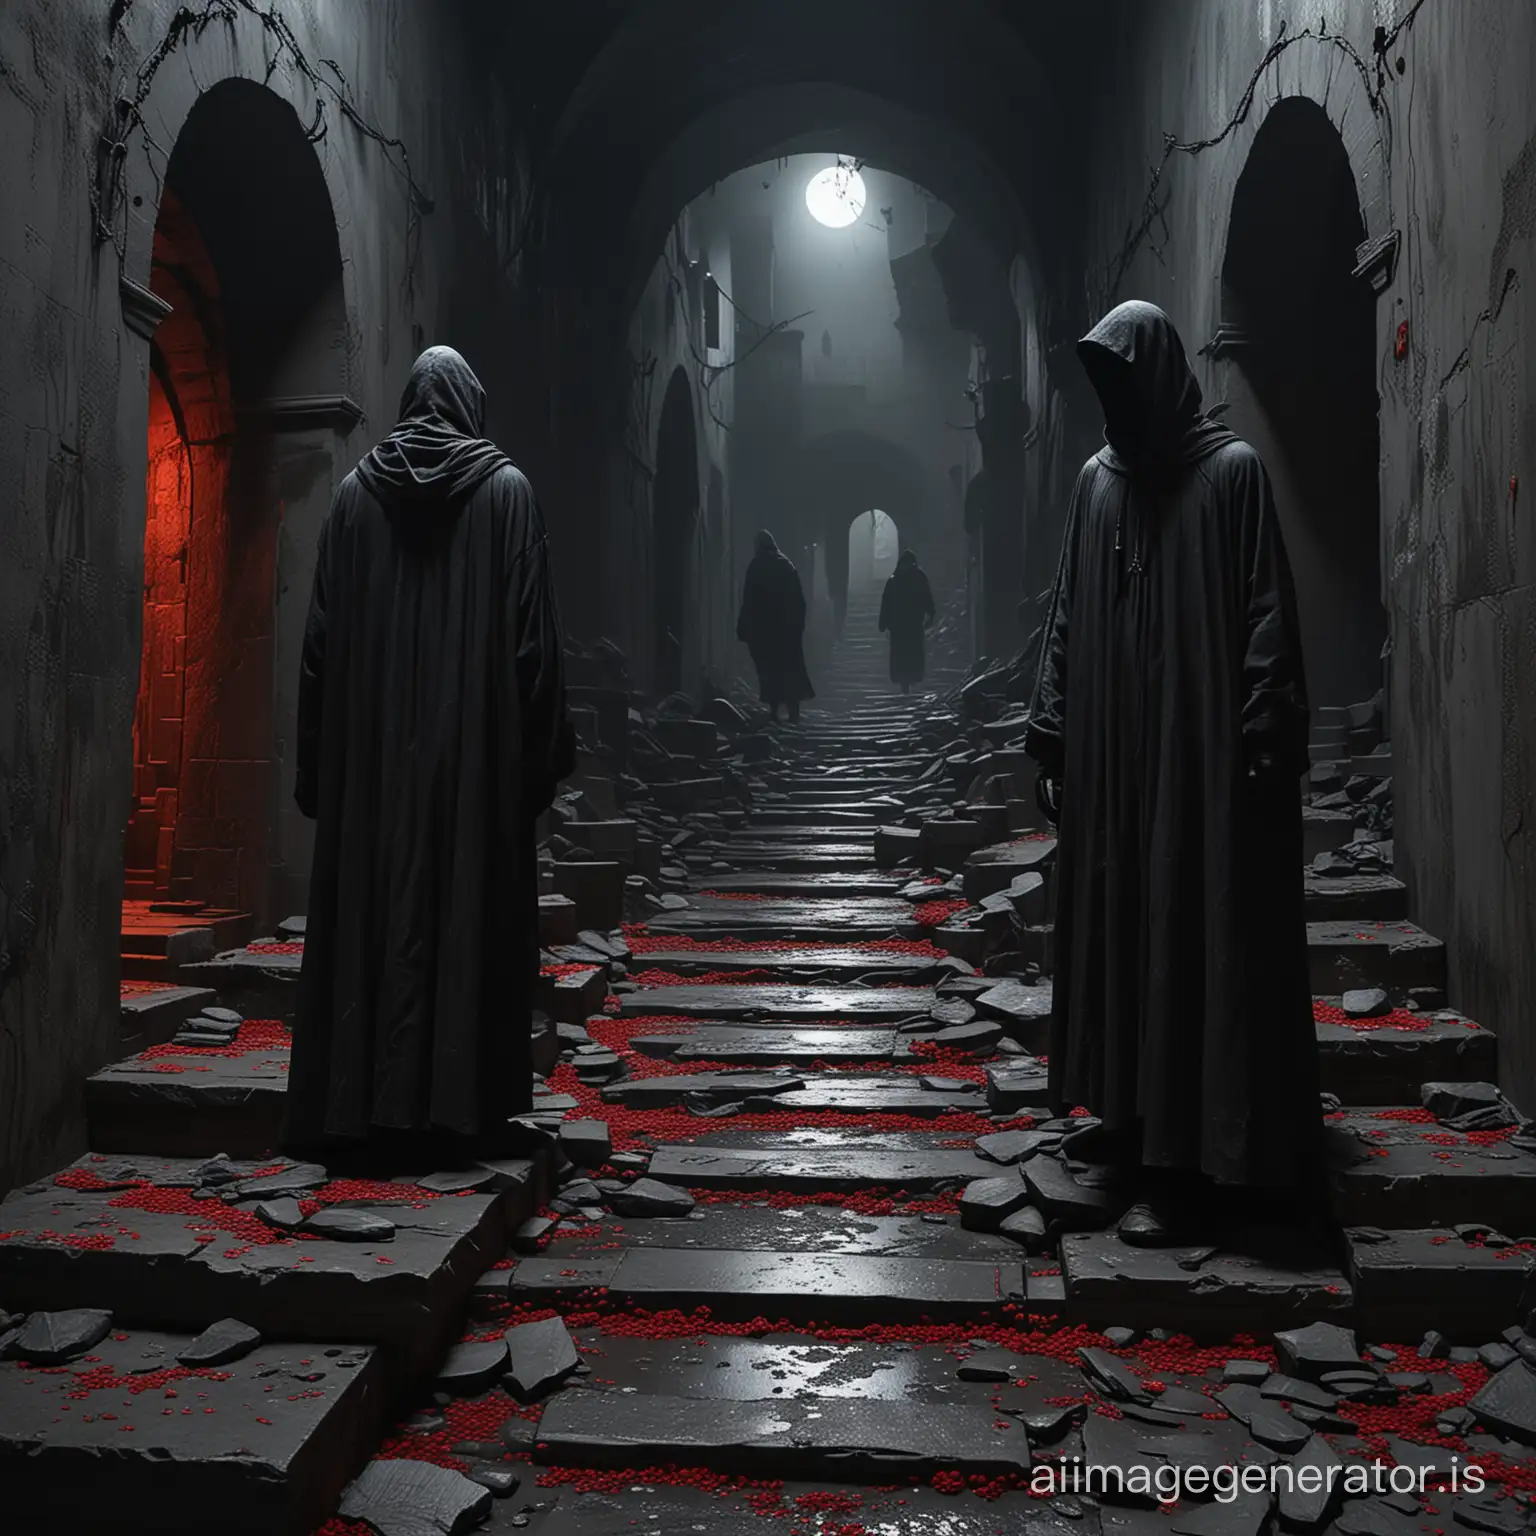 2 tall bald ghosts in rags, in the dark, the painting shows a silhouette in a black robe with a hood, mystical surrealism, stairs and arches, black cracked plaster, black coal on a black night background, ash and darkness, red mirrors puddles, grunge painting, the paint layer is dry and cracked, Ray Tracing Global Illumination, Glow, insanely detailed and intricate,superdetailed